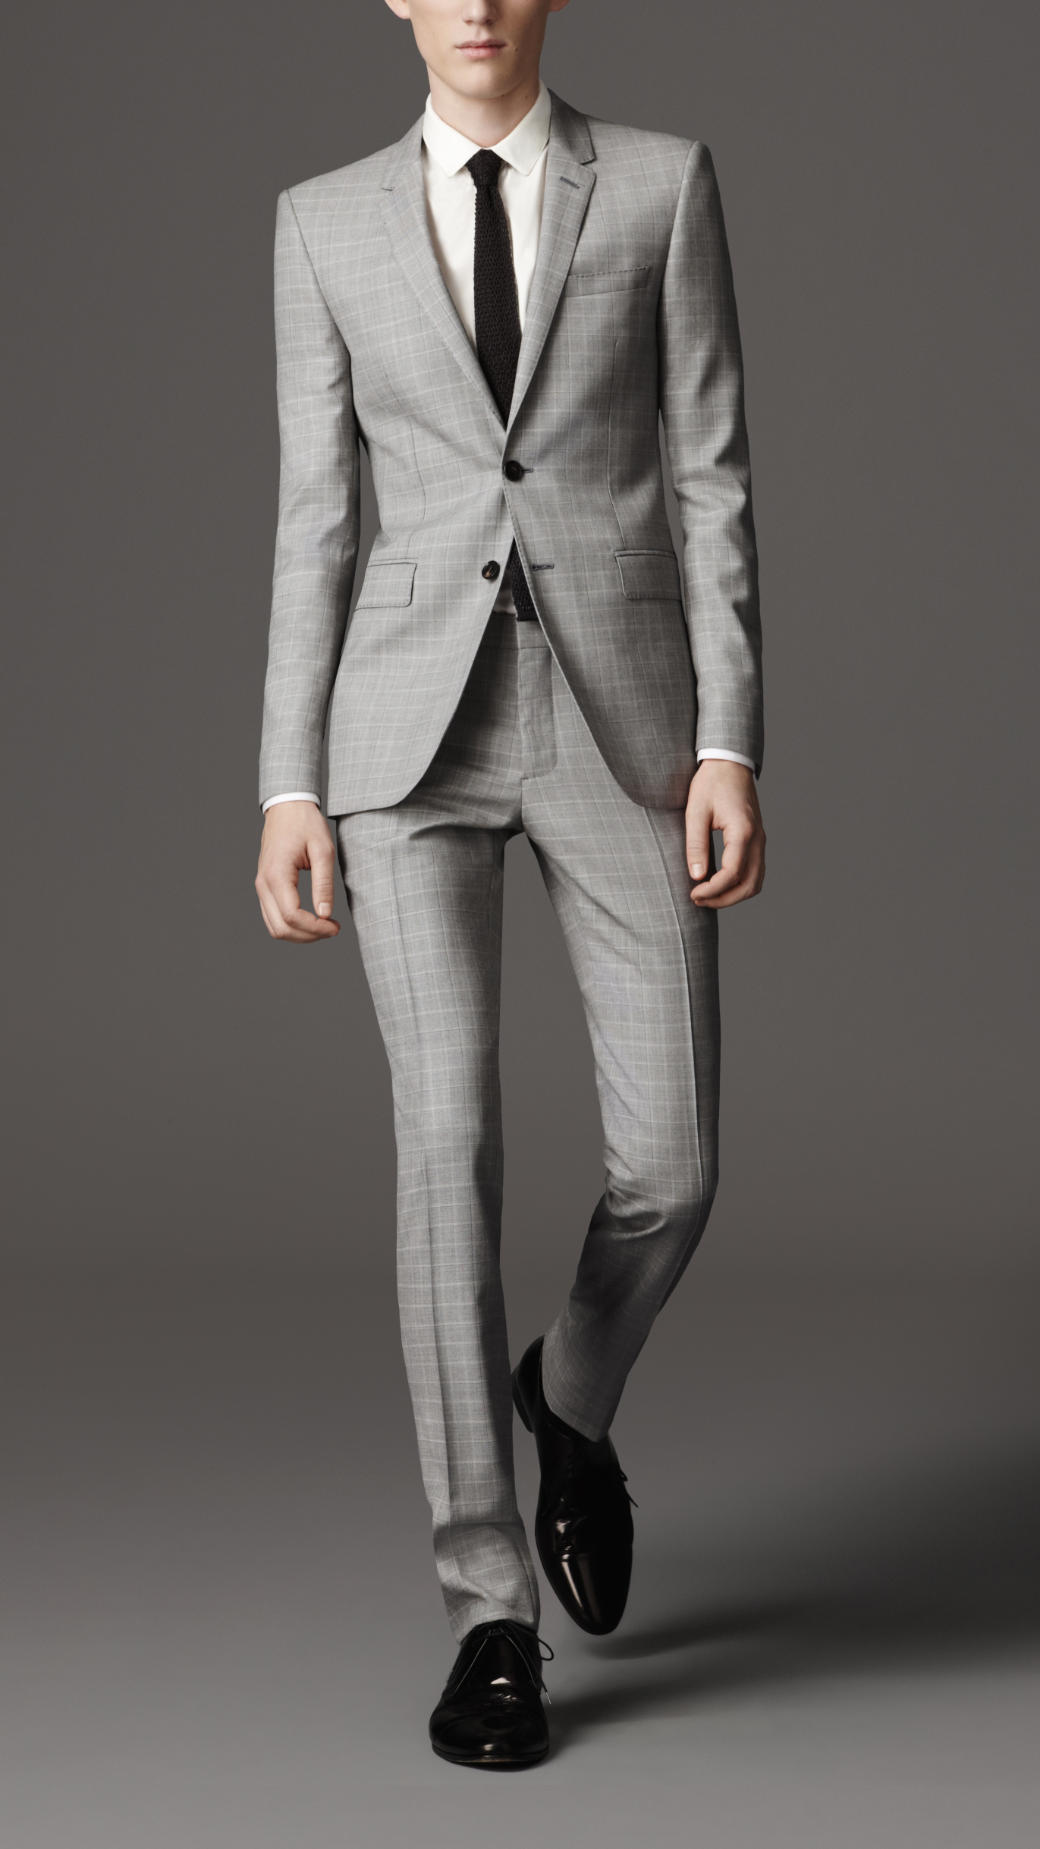 I just bought a Burberry suit opinion pls | Styleforum